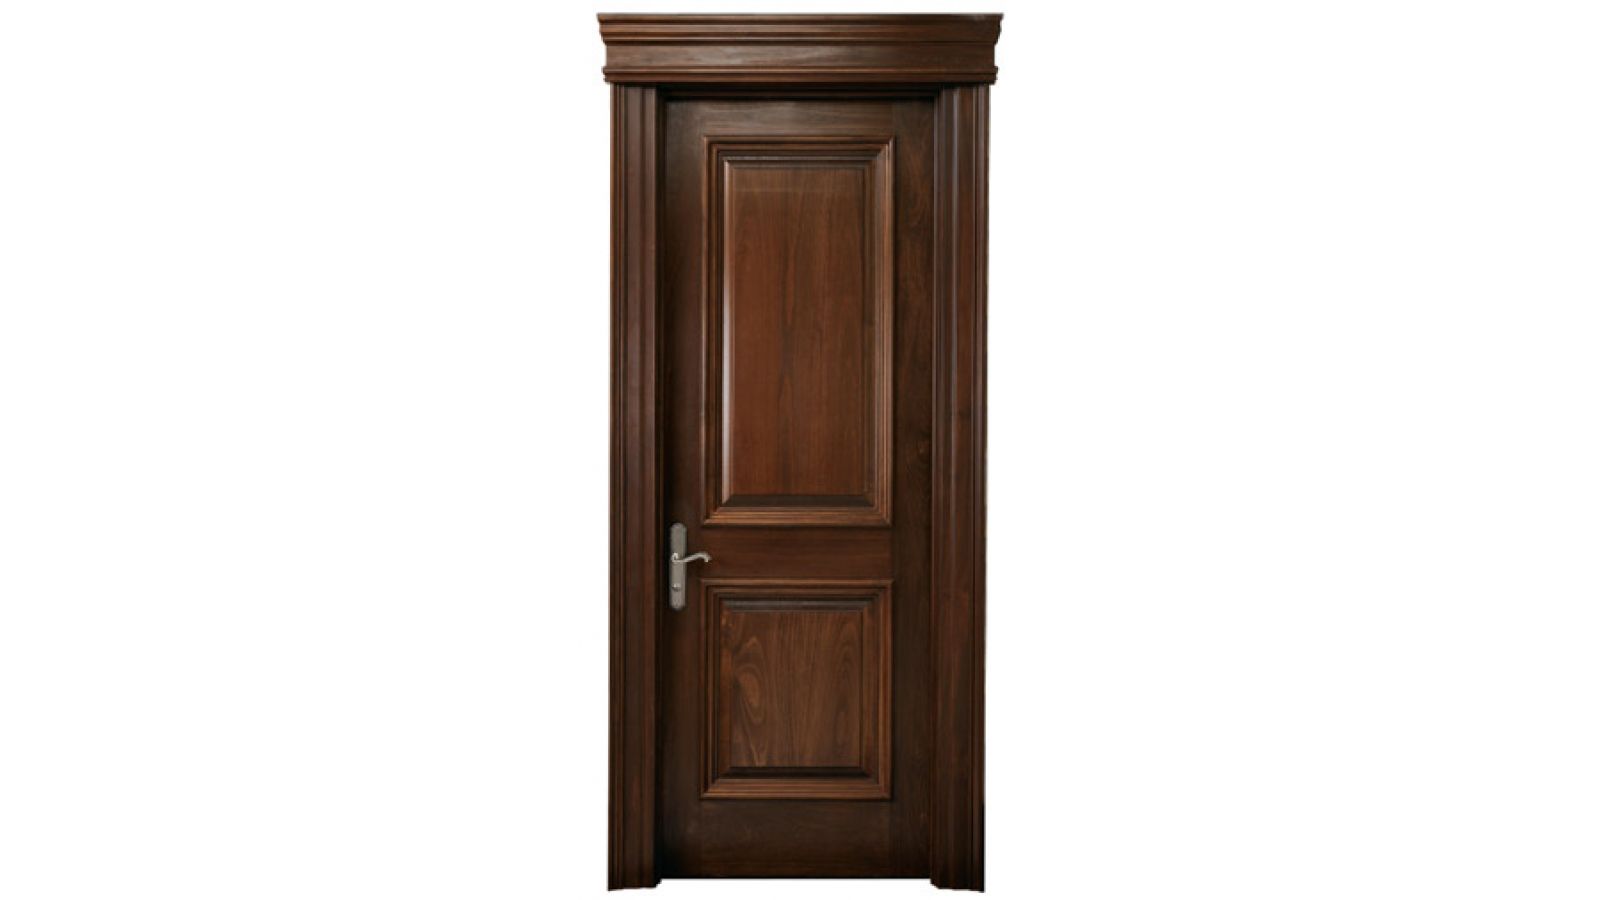 Our Solid Wood Stile & Rail Interior Doors